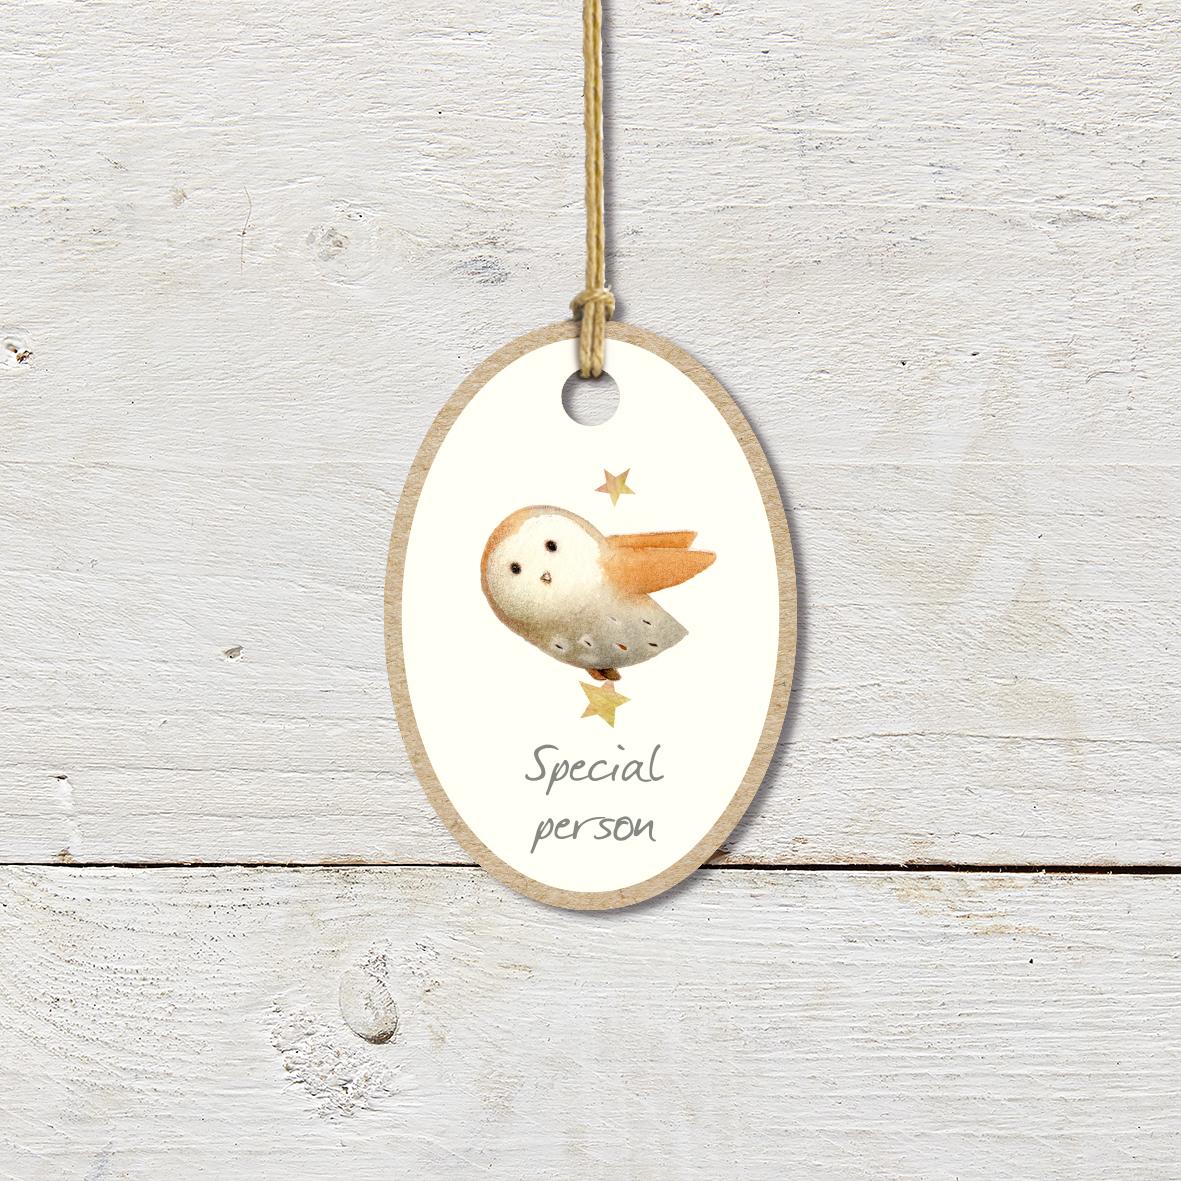 Small Wooden Keepsake Plaque/Tag featuring a cute owl carrying a star with a ’Special Person’ caption.